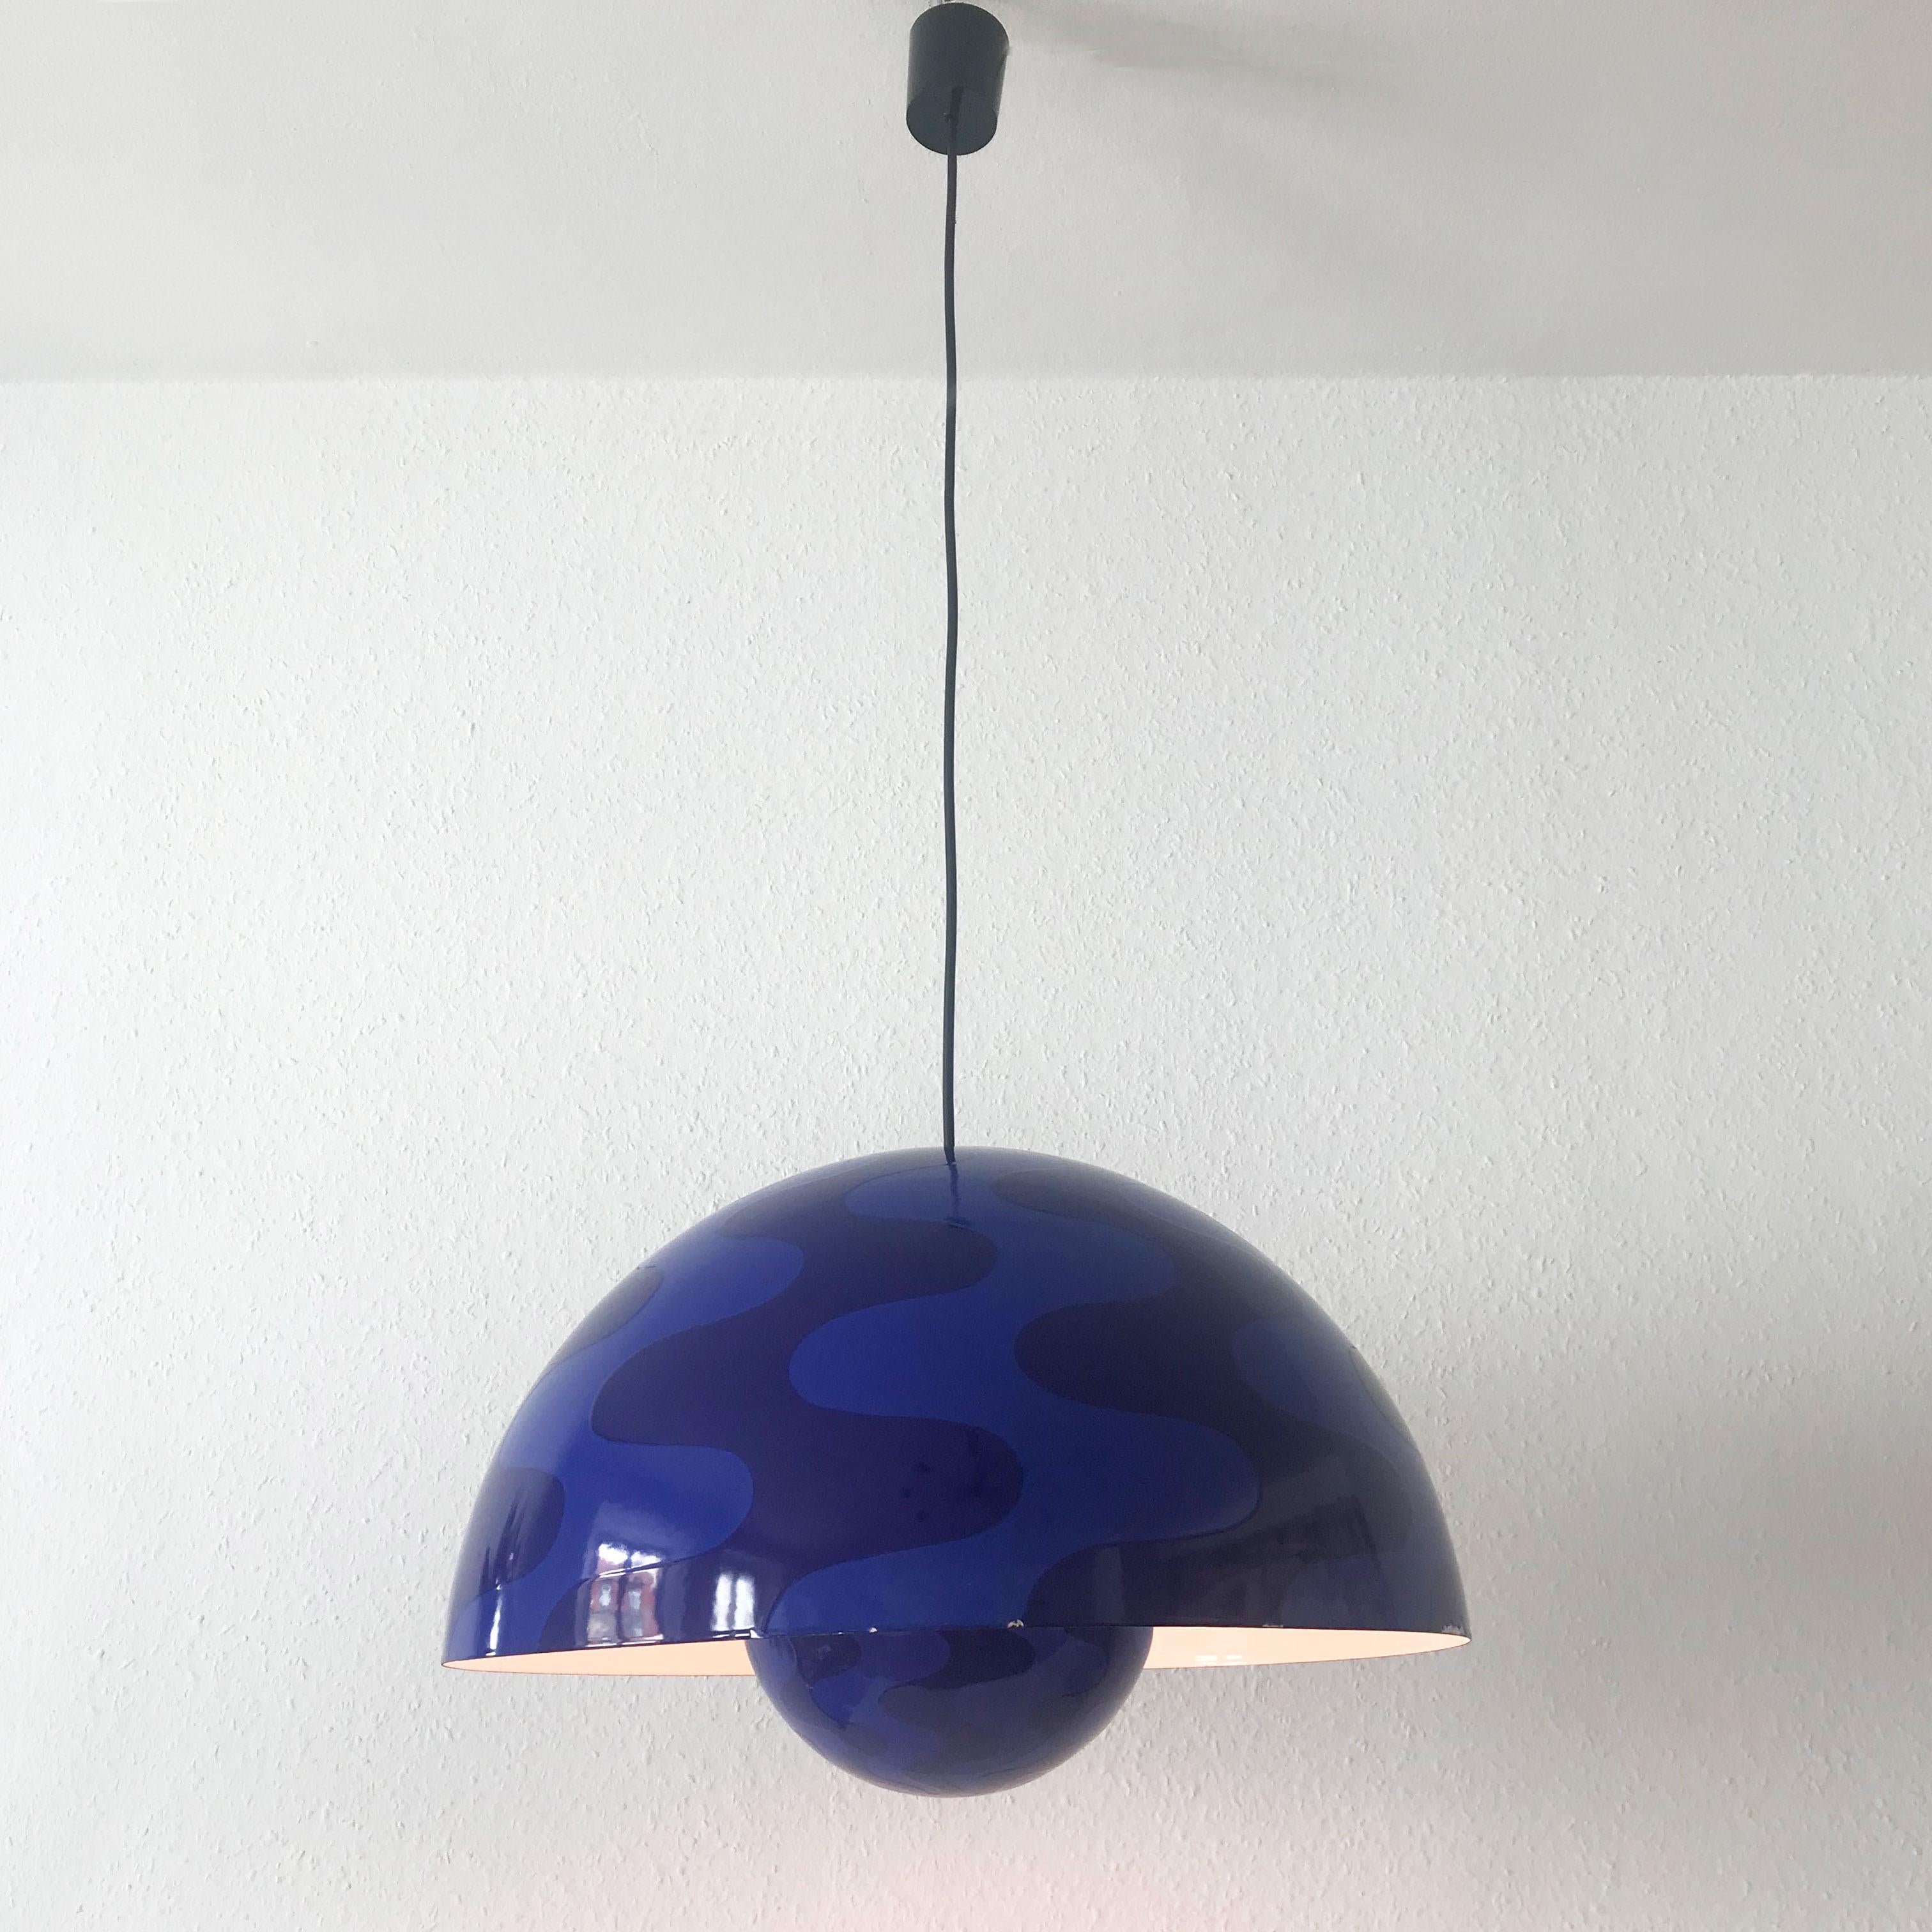 Enameled Rare and Large Flower Pot Pendant Lamp by Verner Panton for Louis Poulsen 1971 For Sale